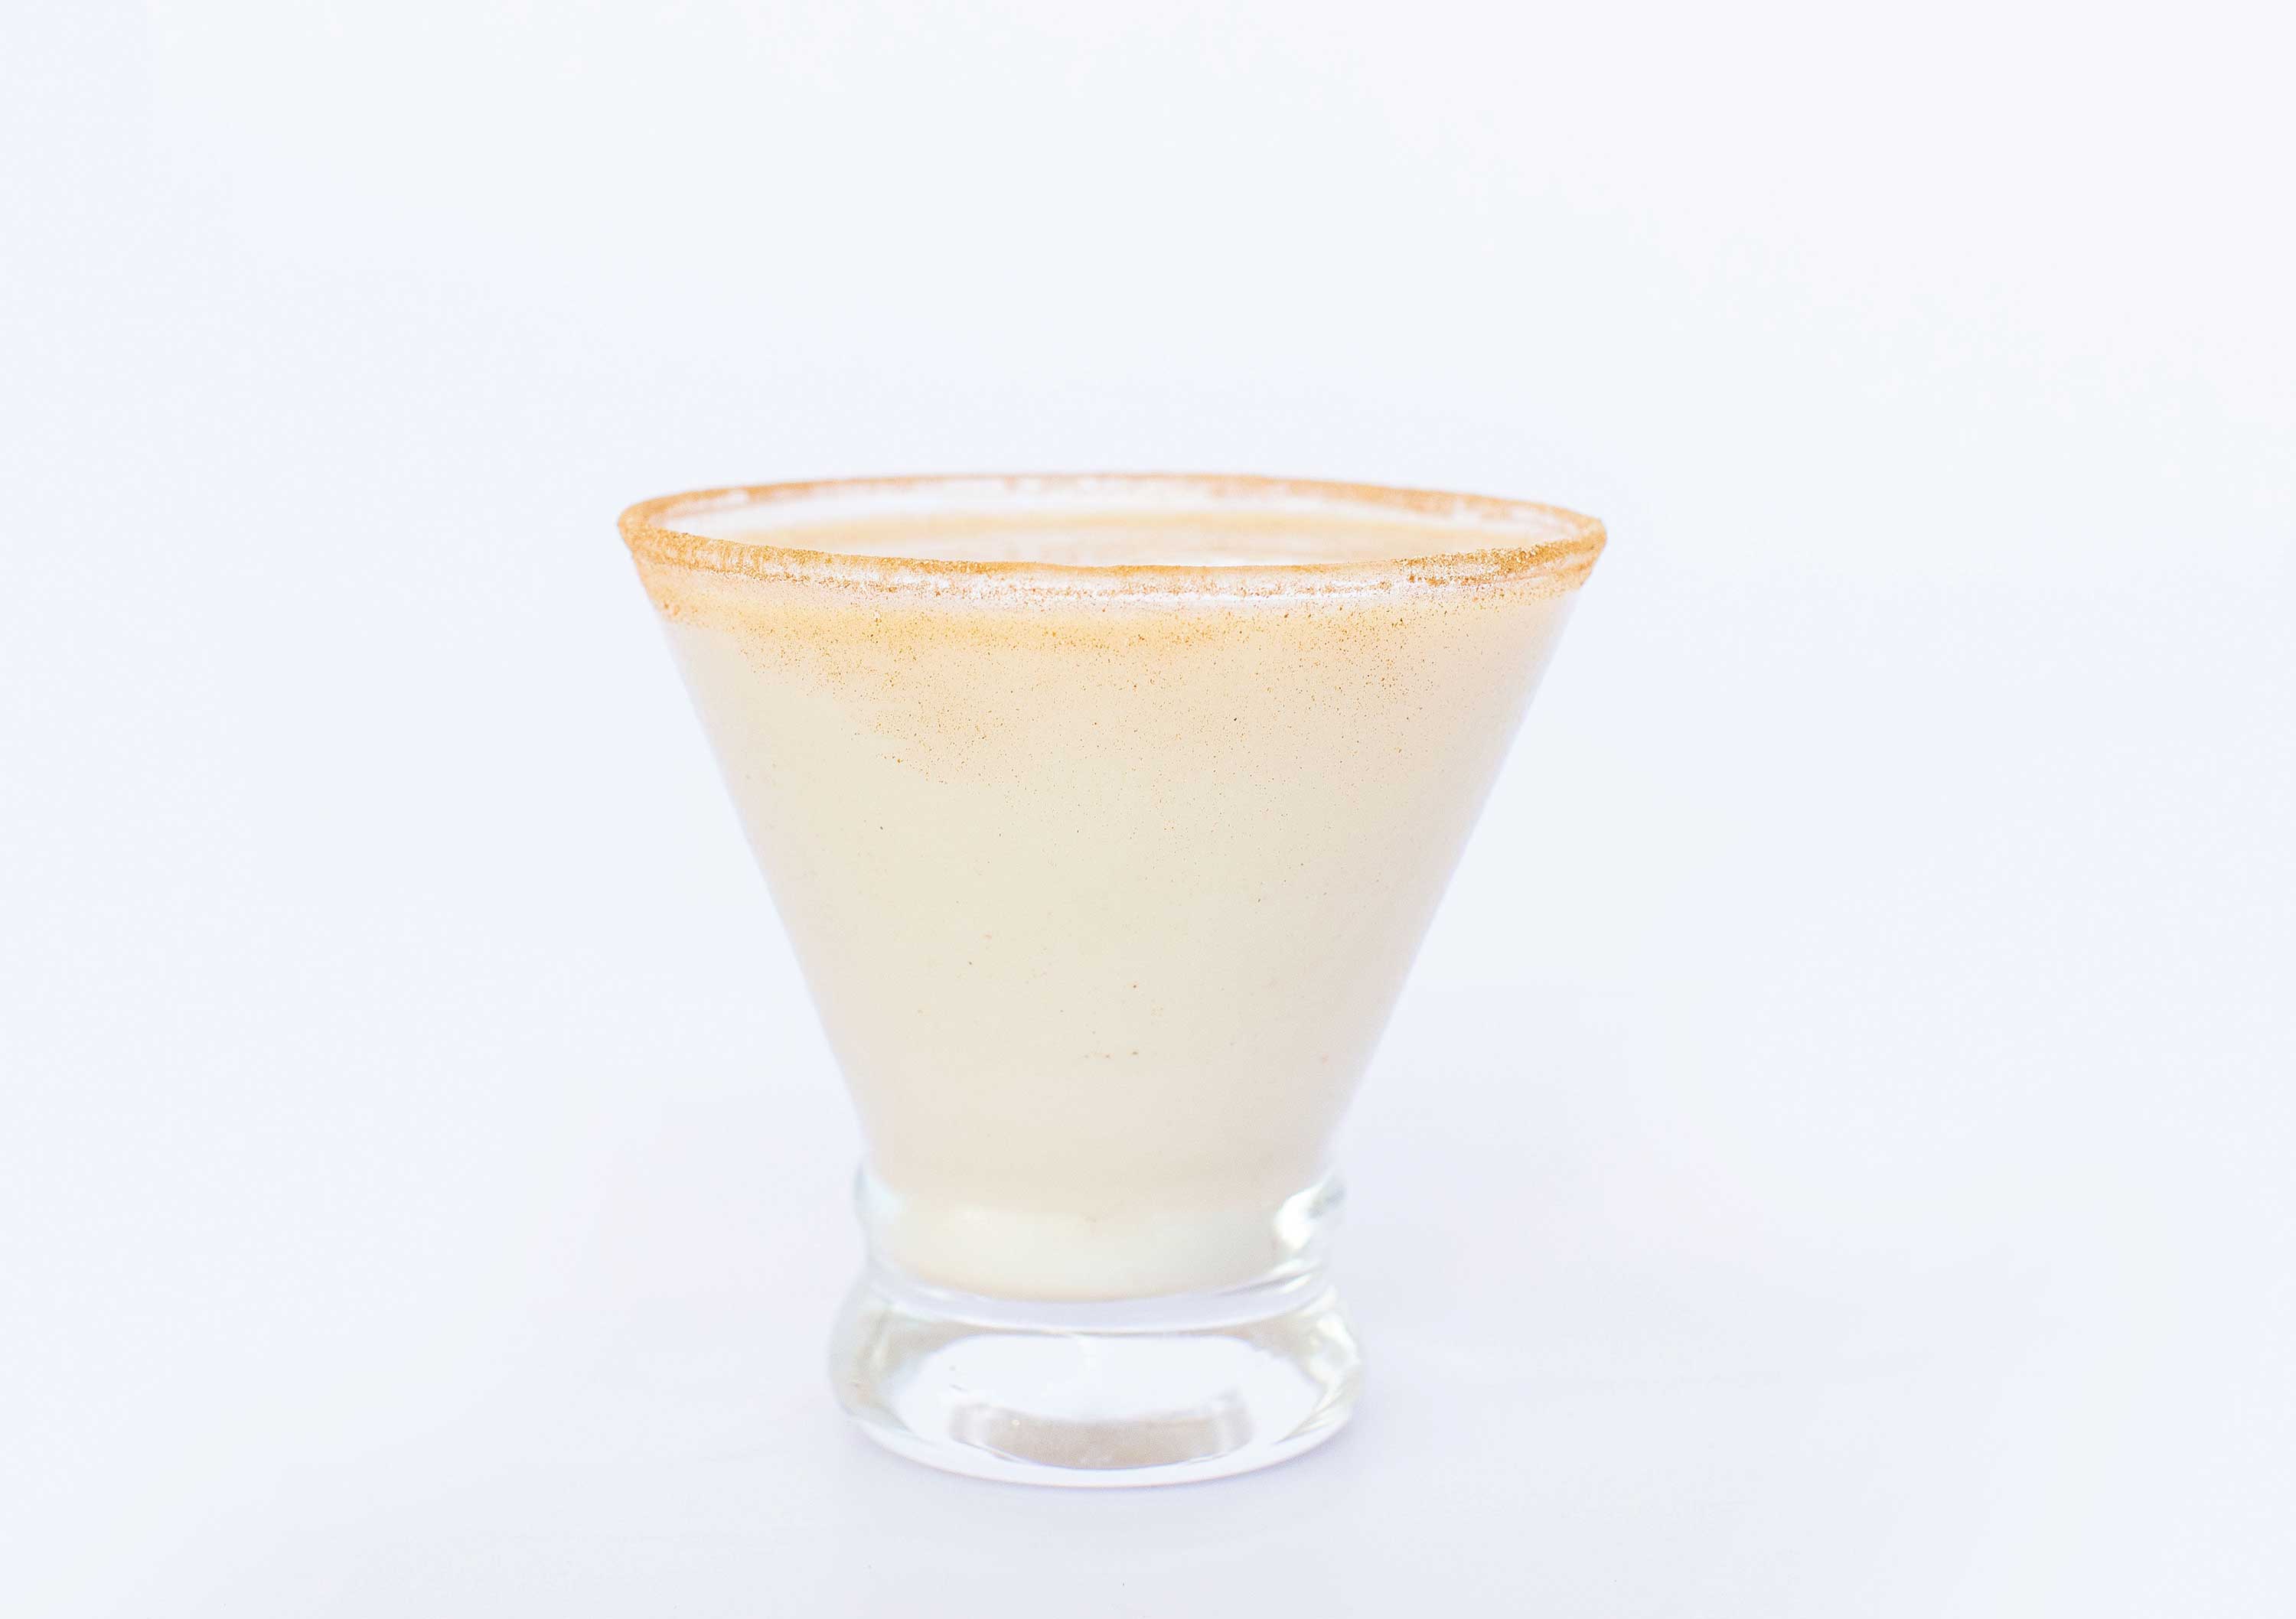 Image: A flared glass is filled with a creamy white liquid. There is a light dusting of cinnamon powder on the rim.